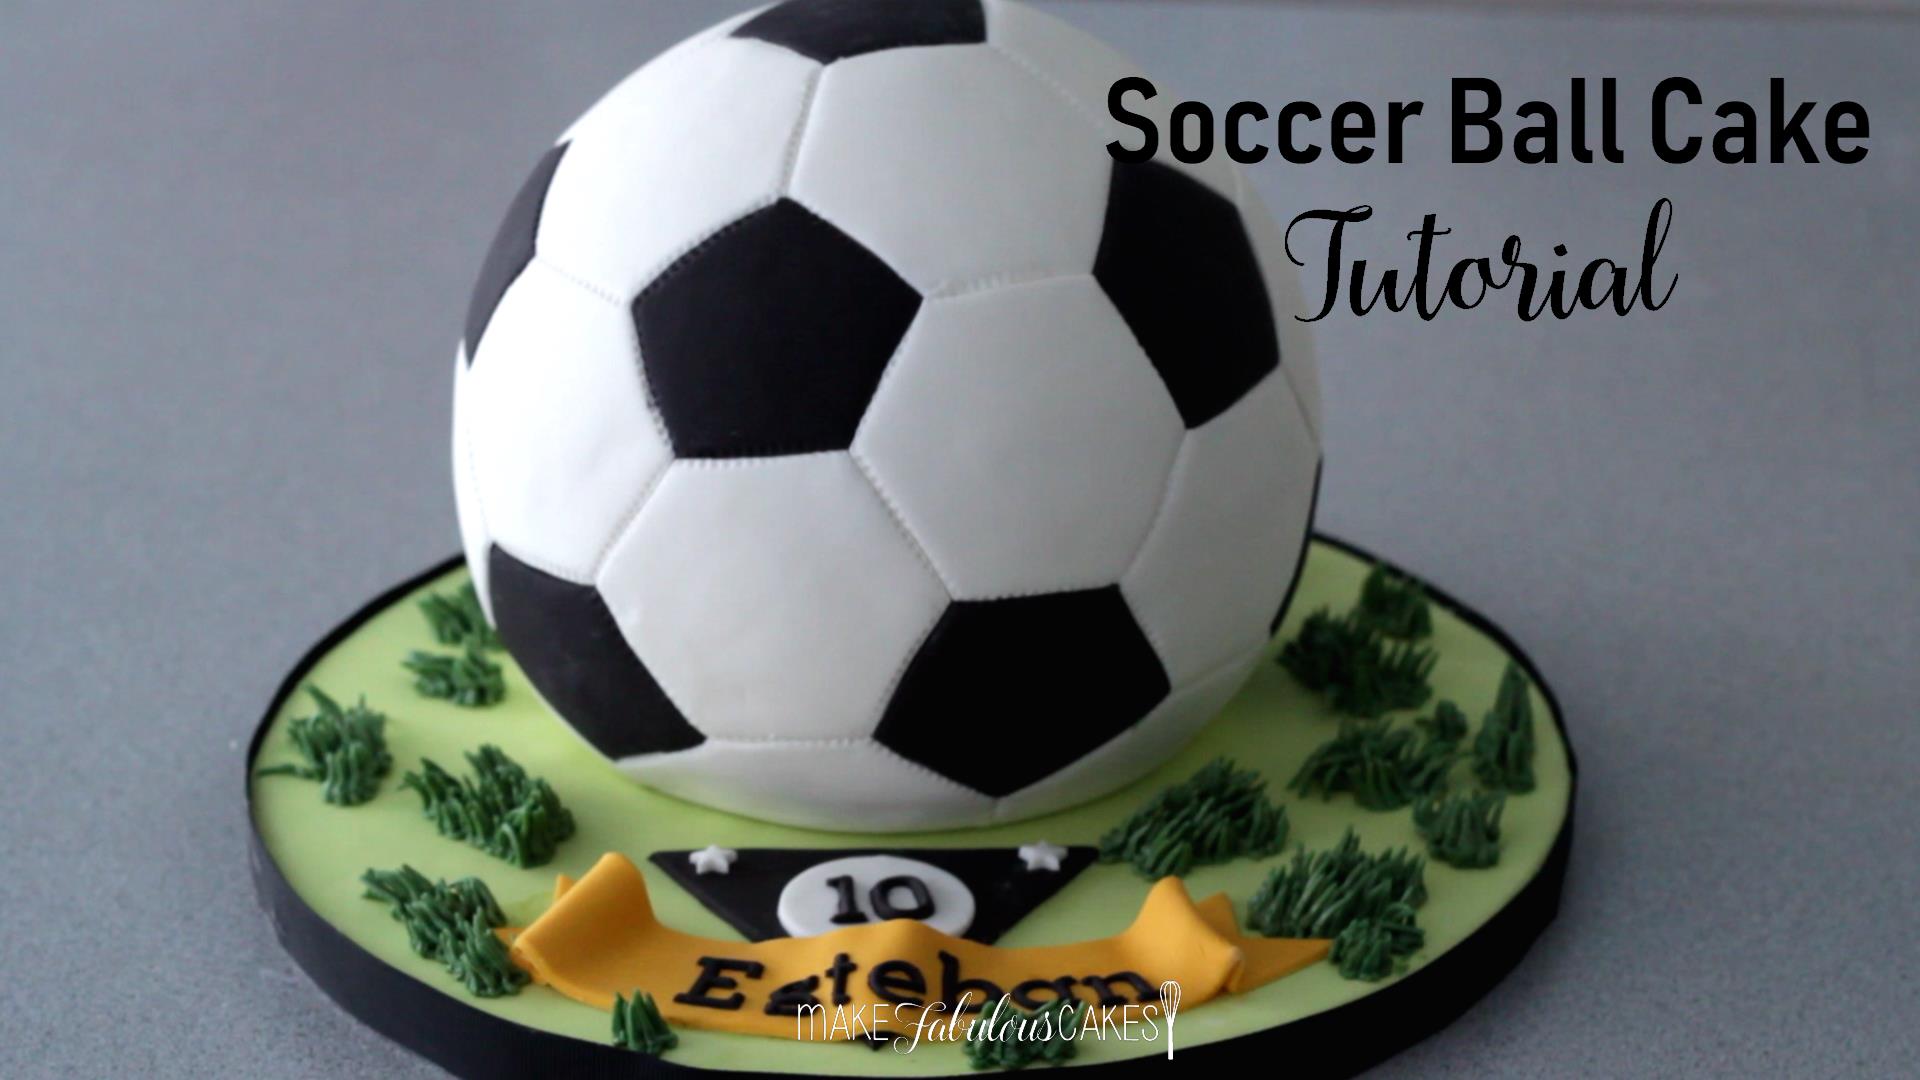 Football Theme Cake Designs & Images